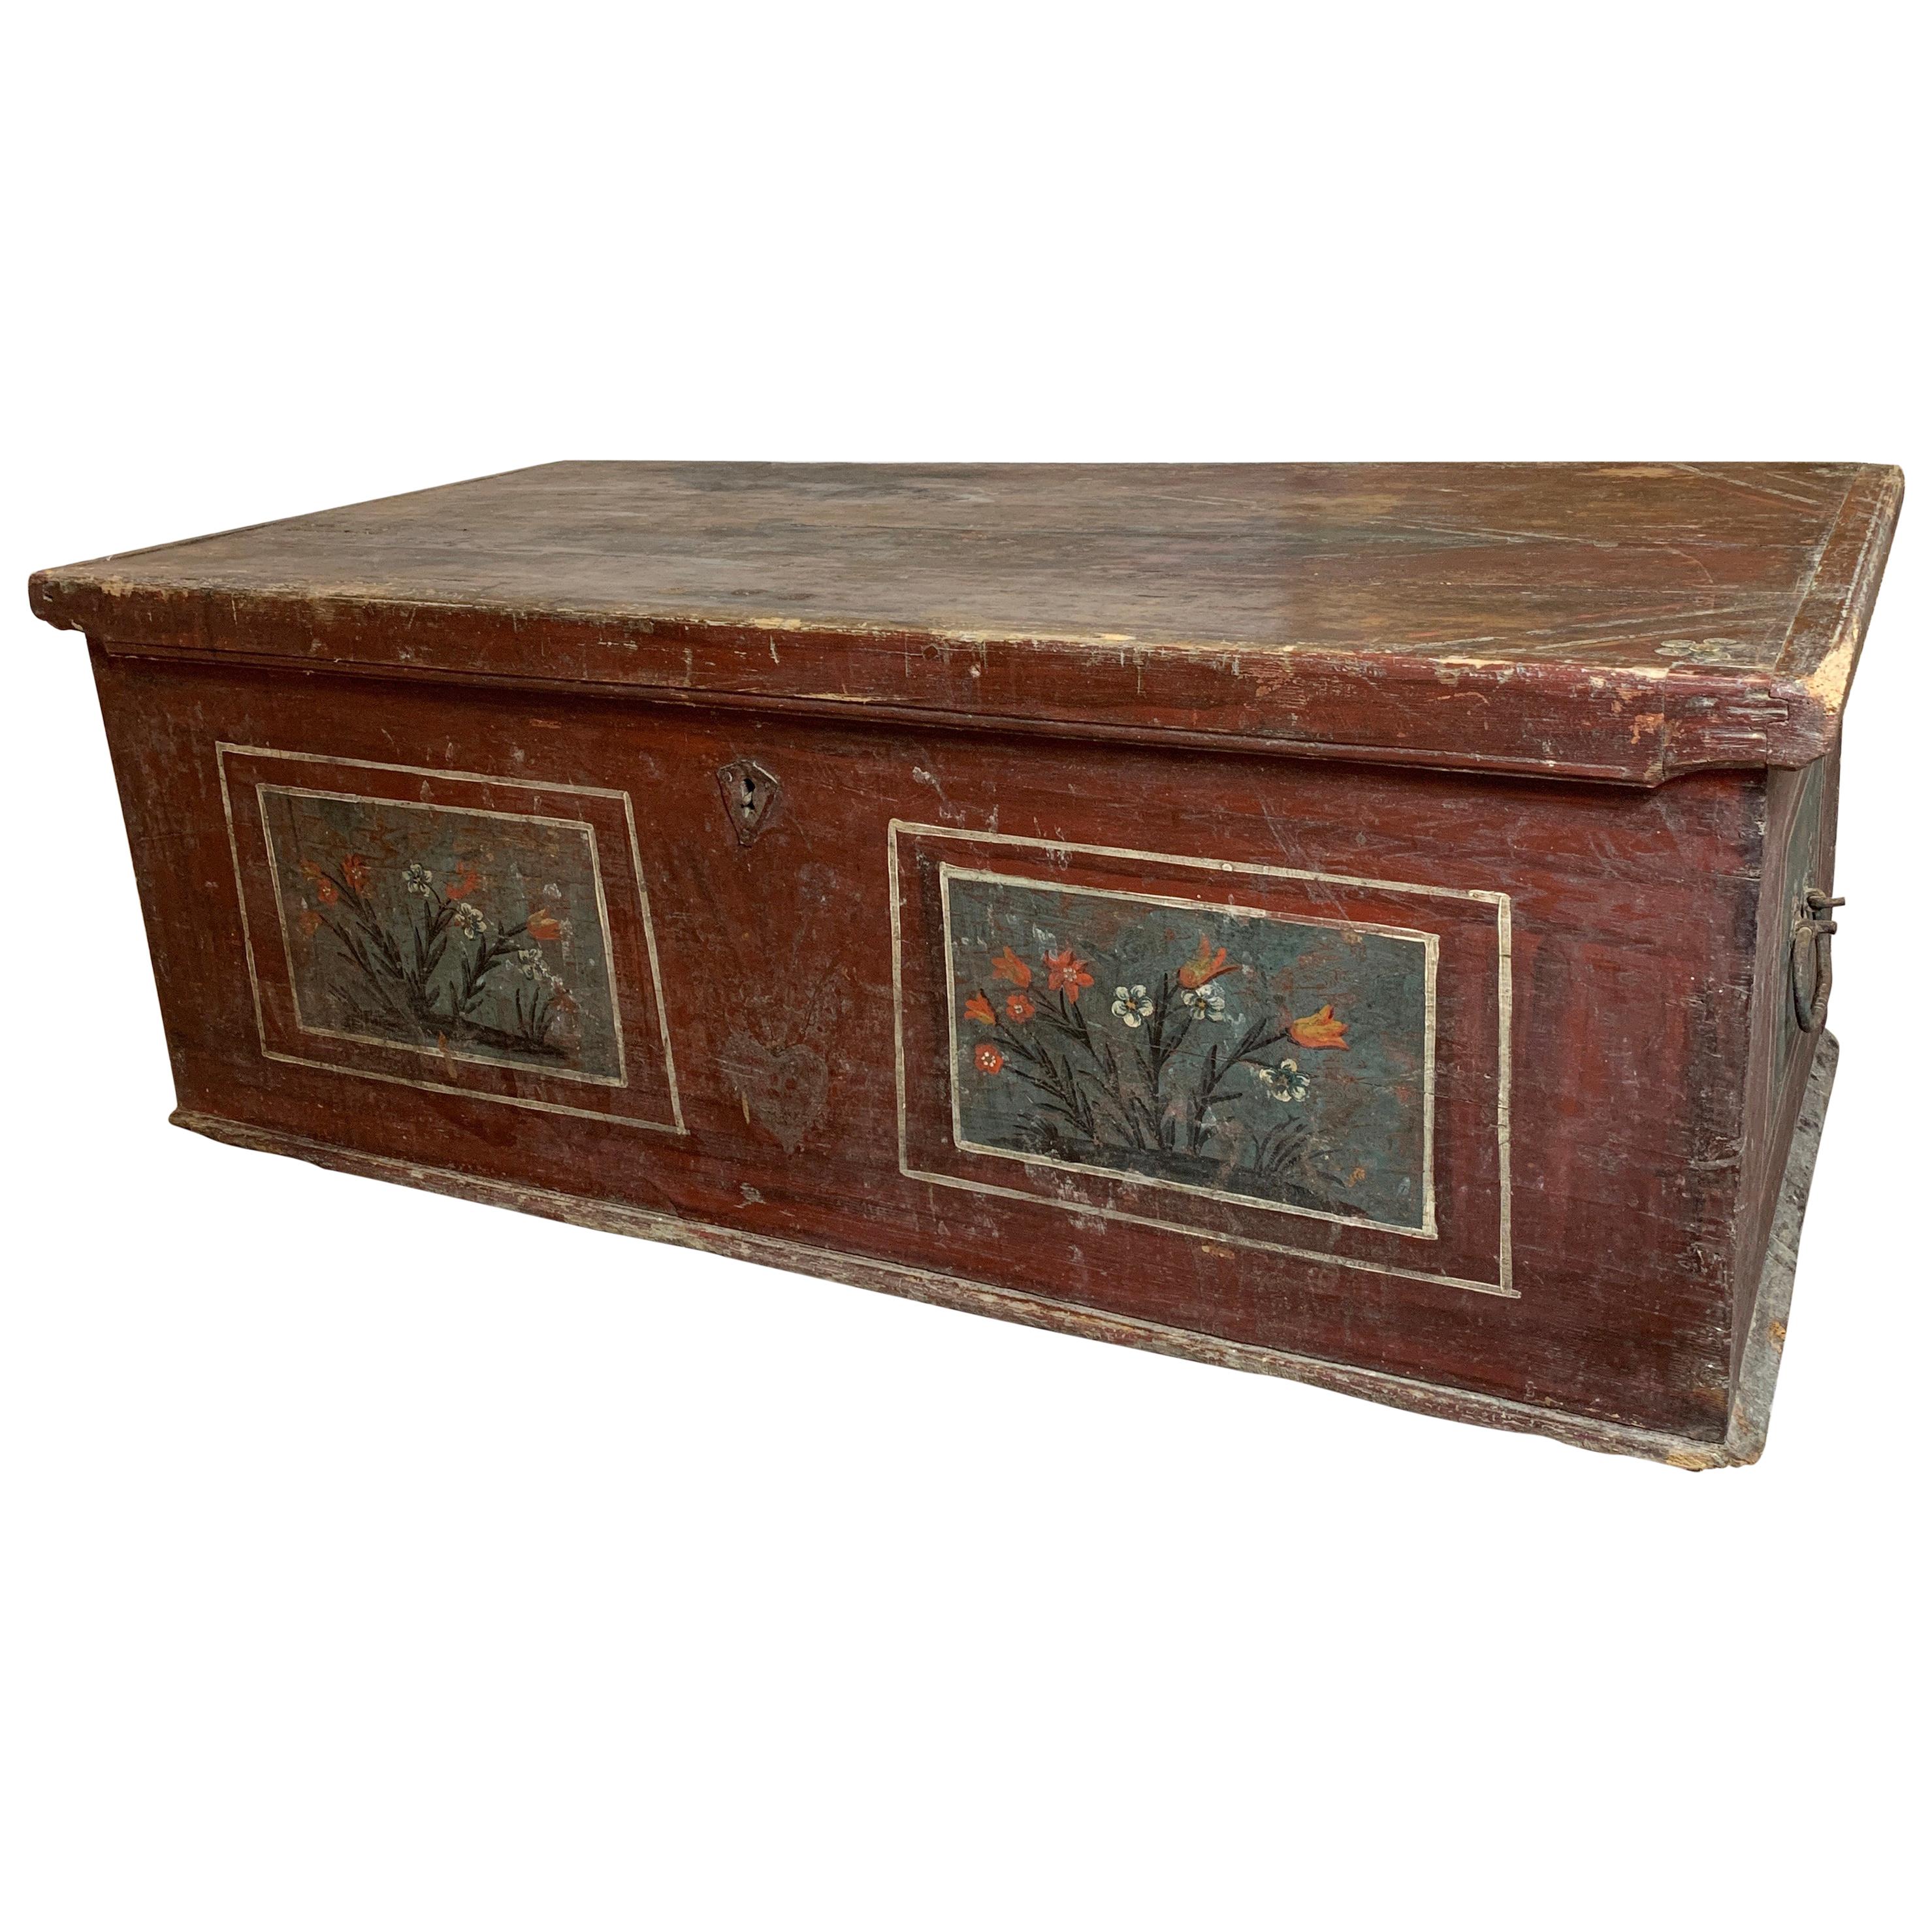 Late 18th Century European Hand Painted Marriage Chest